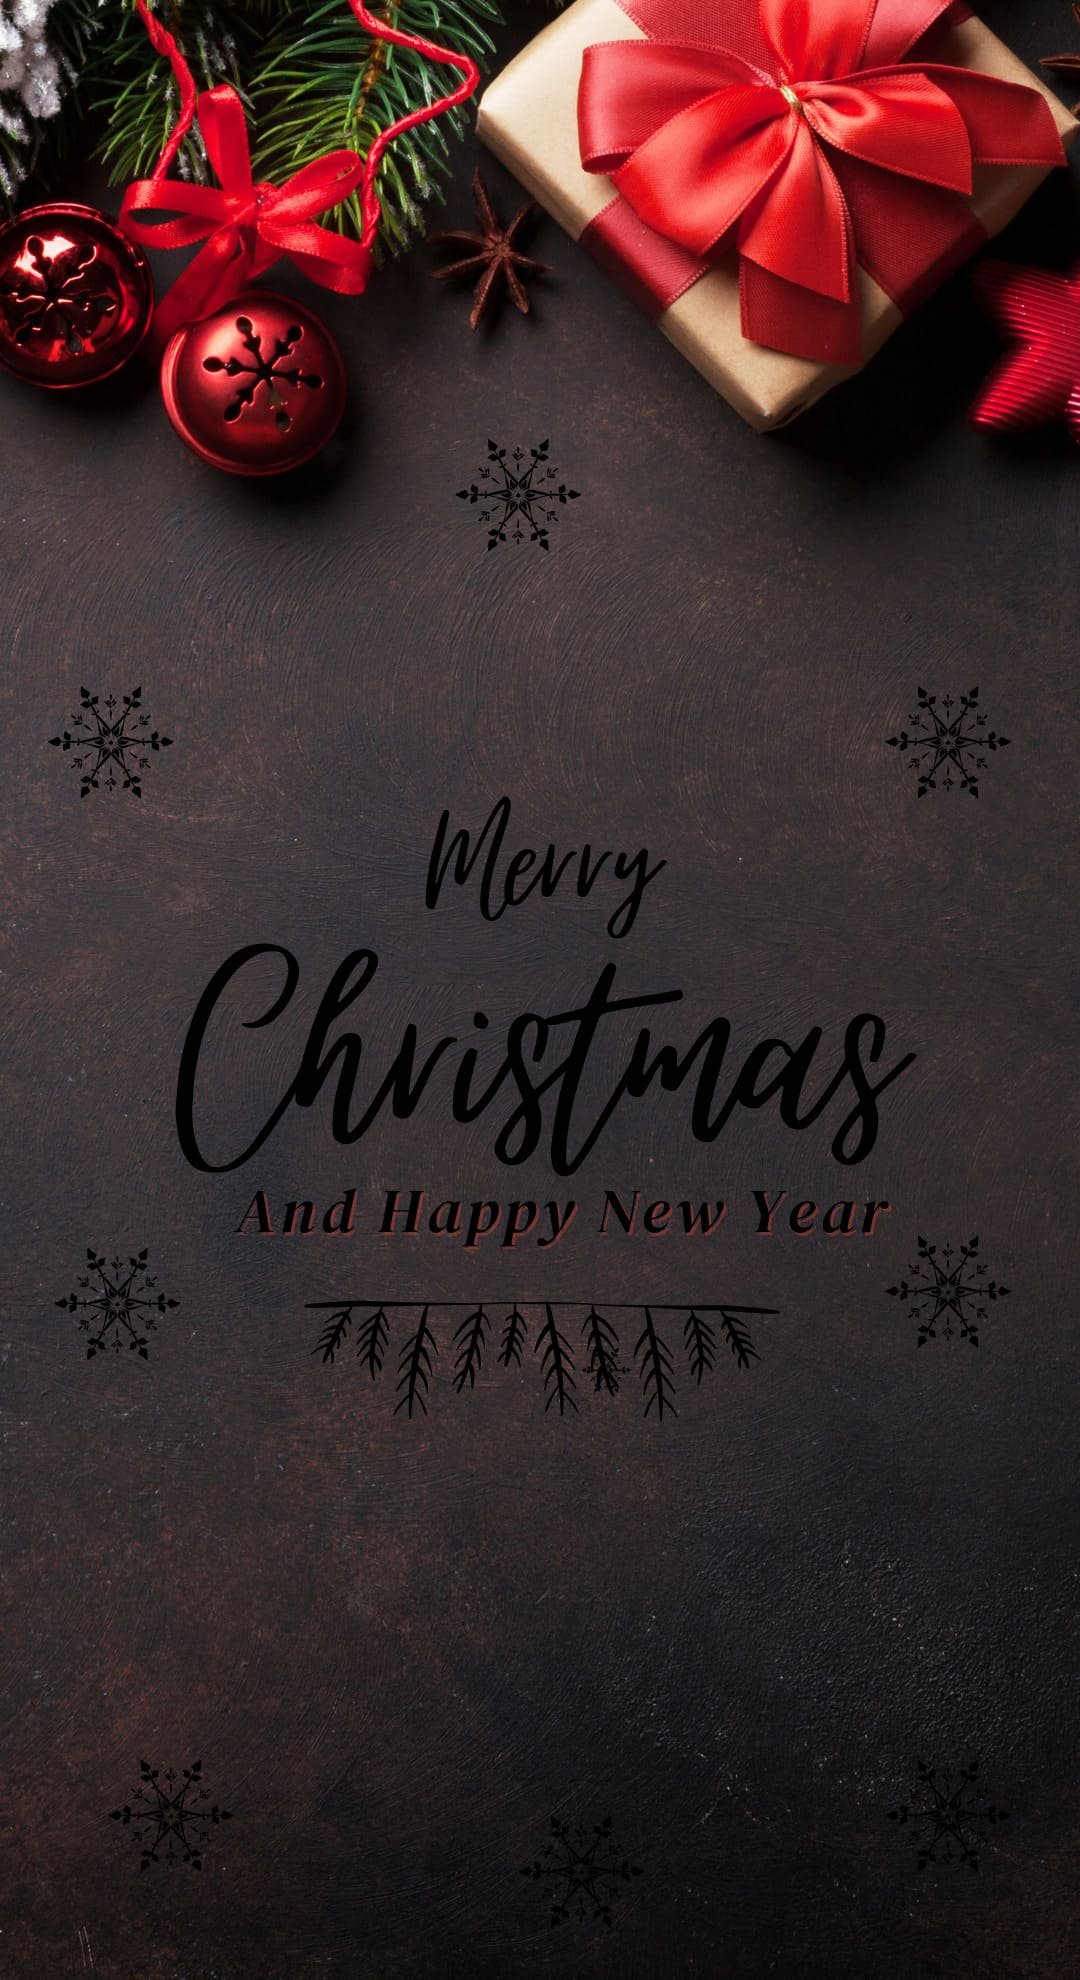 Aesthetic Christmas background images 8K Christmas wallpaper iPhone